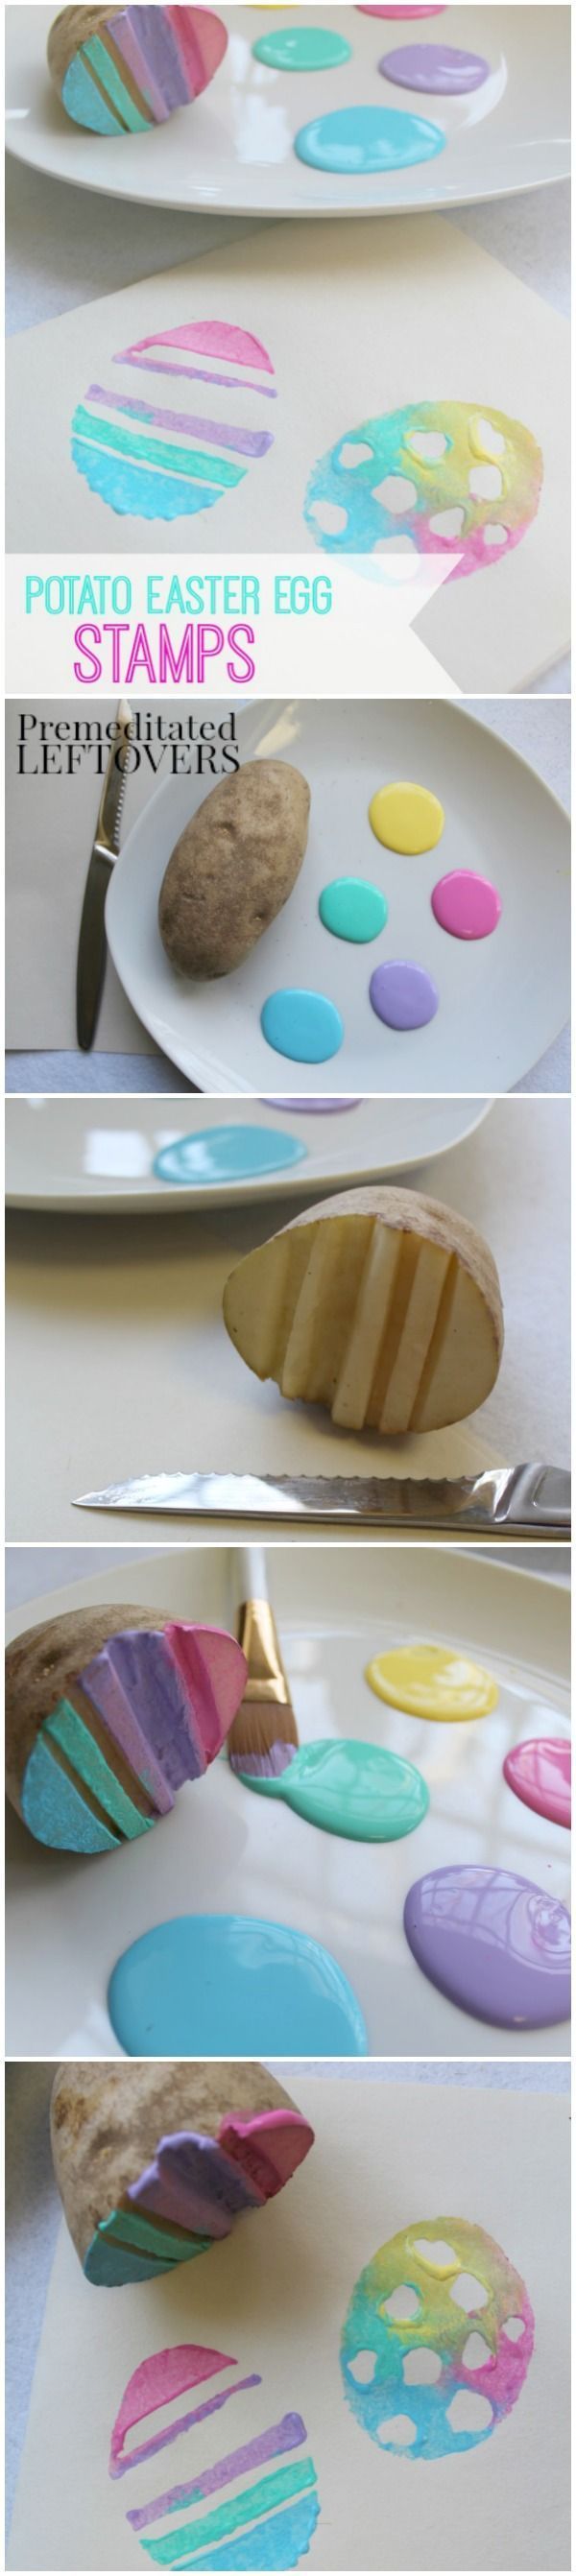 Handmade Potato Easter Egg Stamps for Kids- Grab a potato and make these DIY Easter egg stamps. Kids will love painting with this